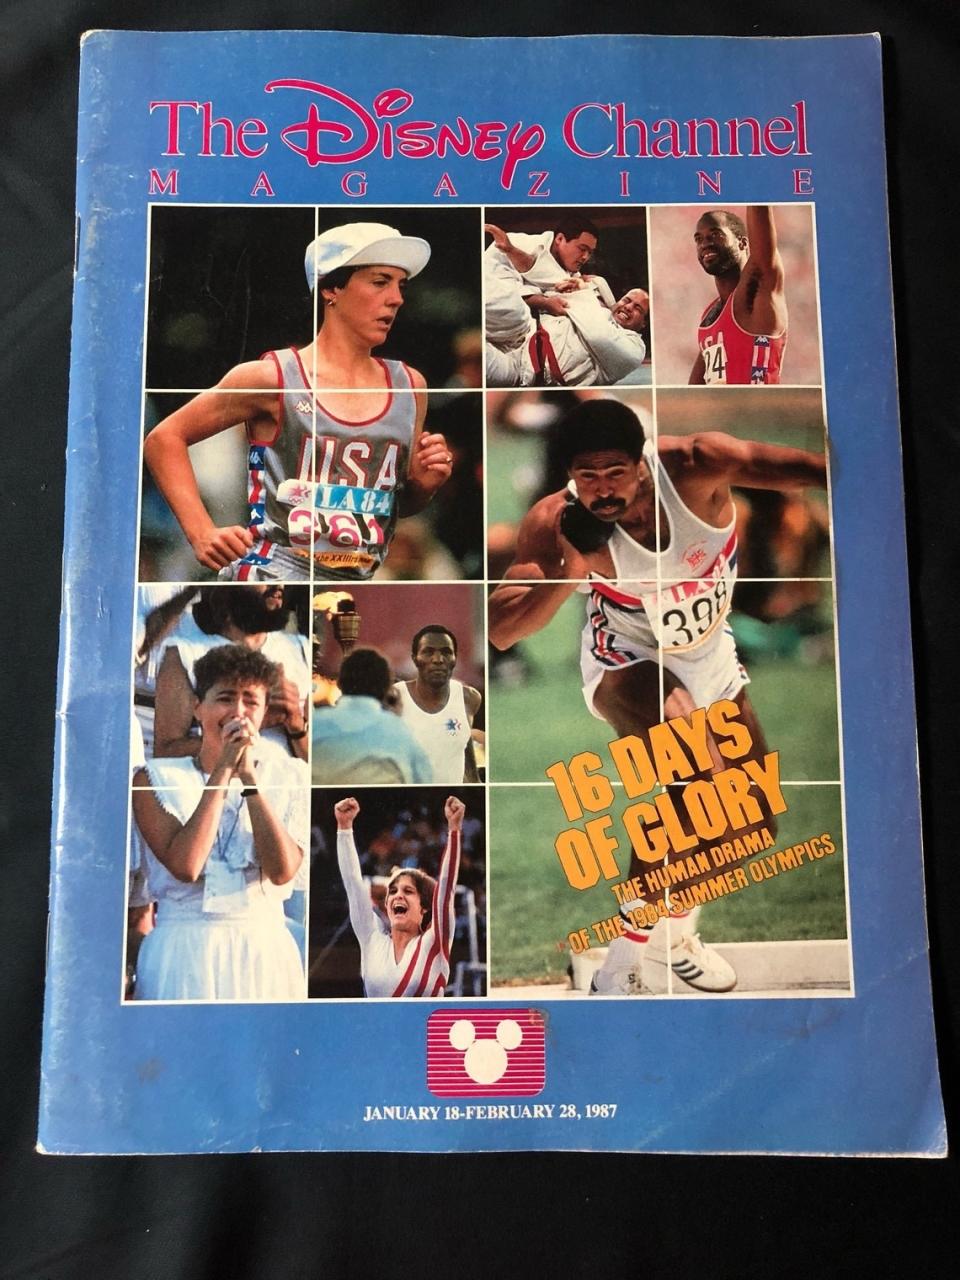 Disney Channel magazine featuring photos from the 1984 Olympics